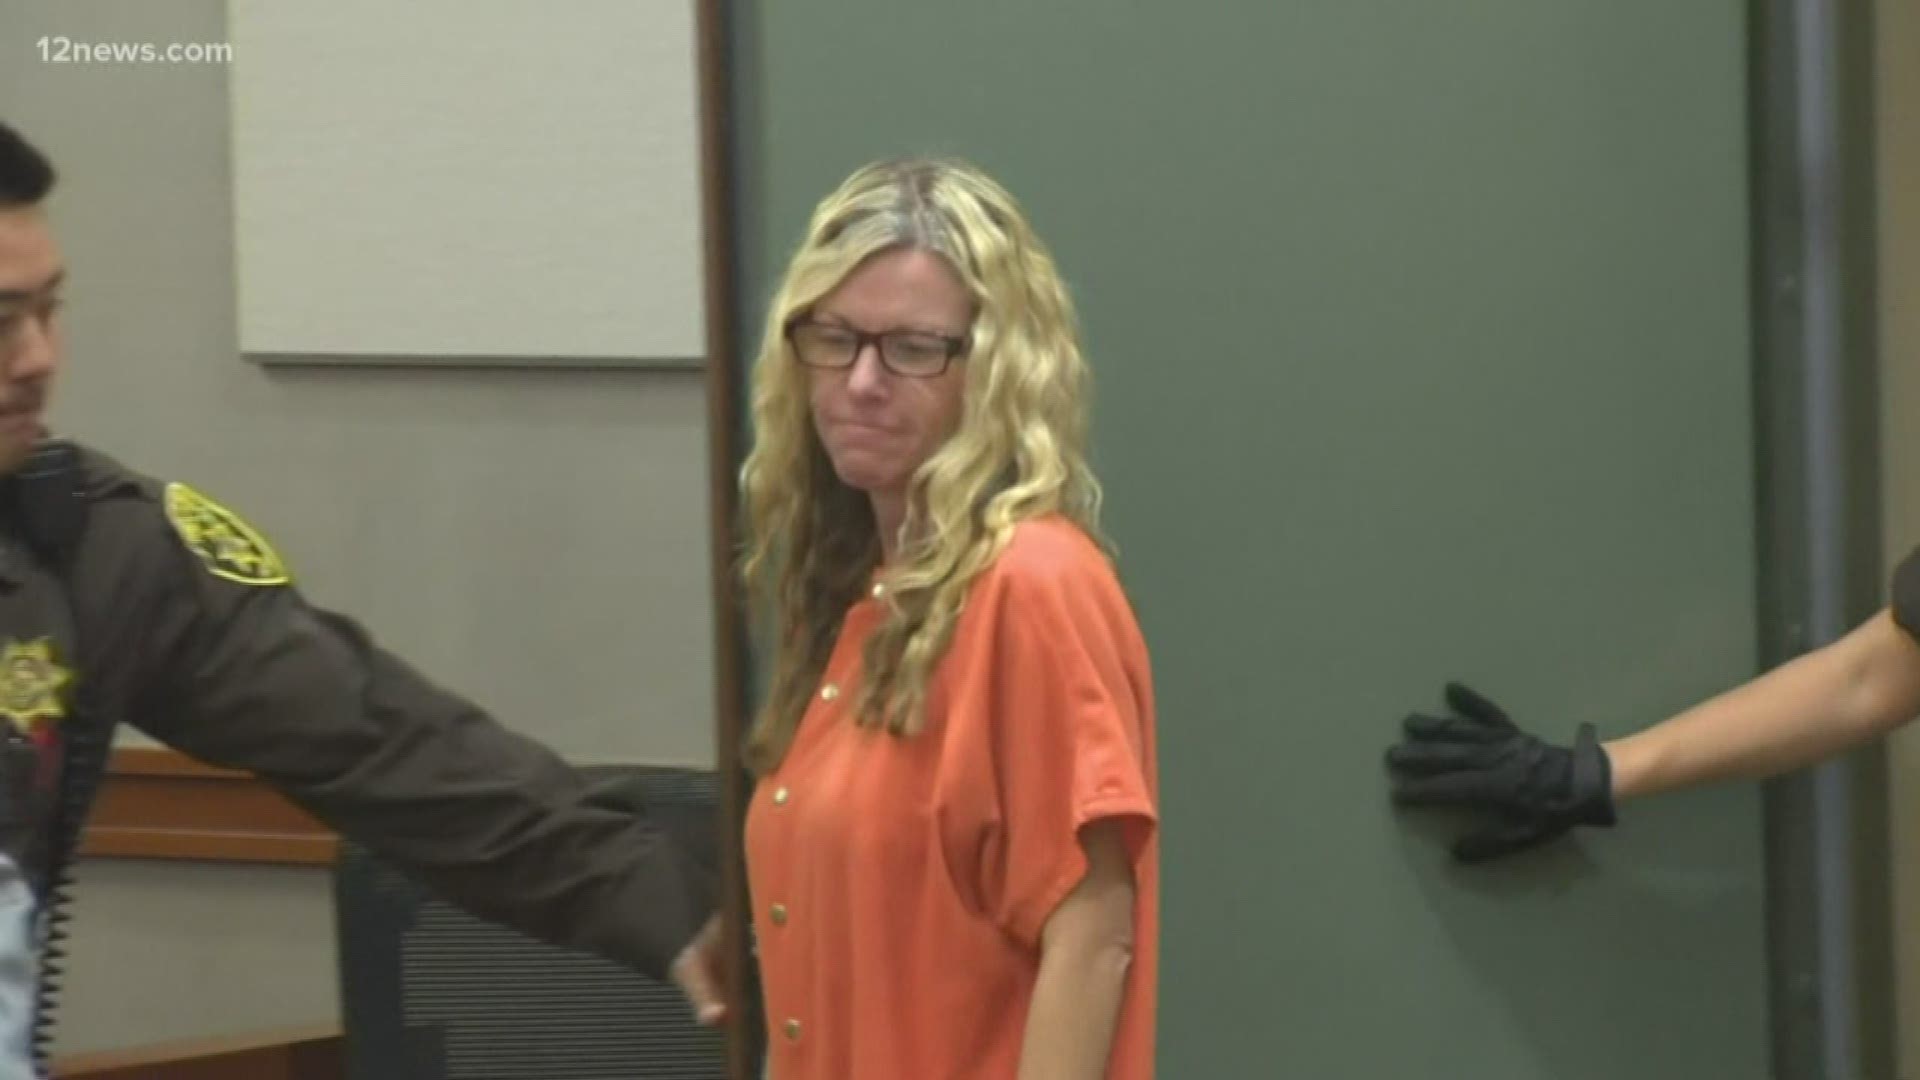 Lori Vallow is facing several charges, including felony child desertion. Team 12's Jen Wahl has the latest.